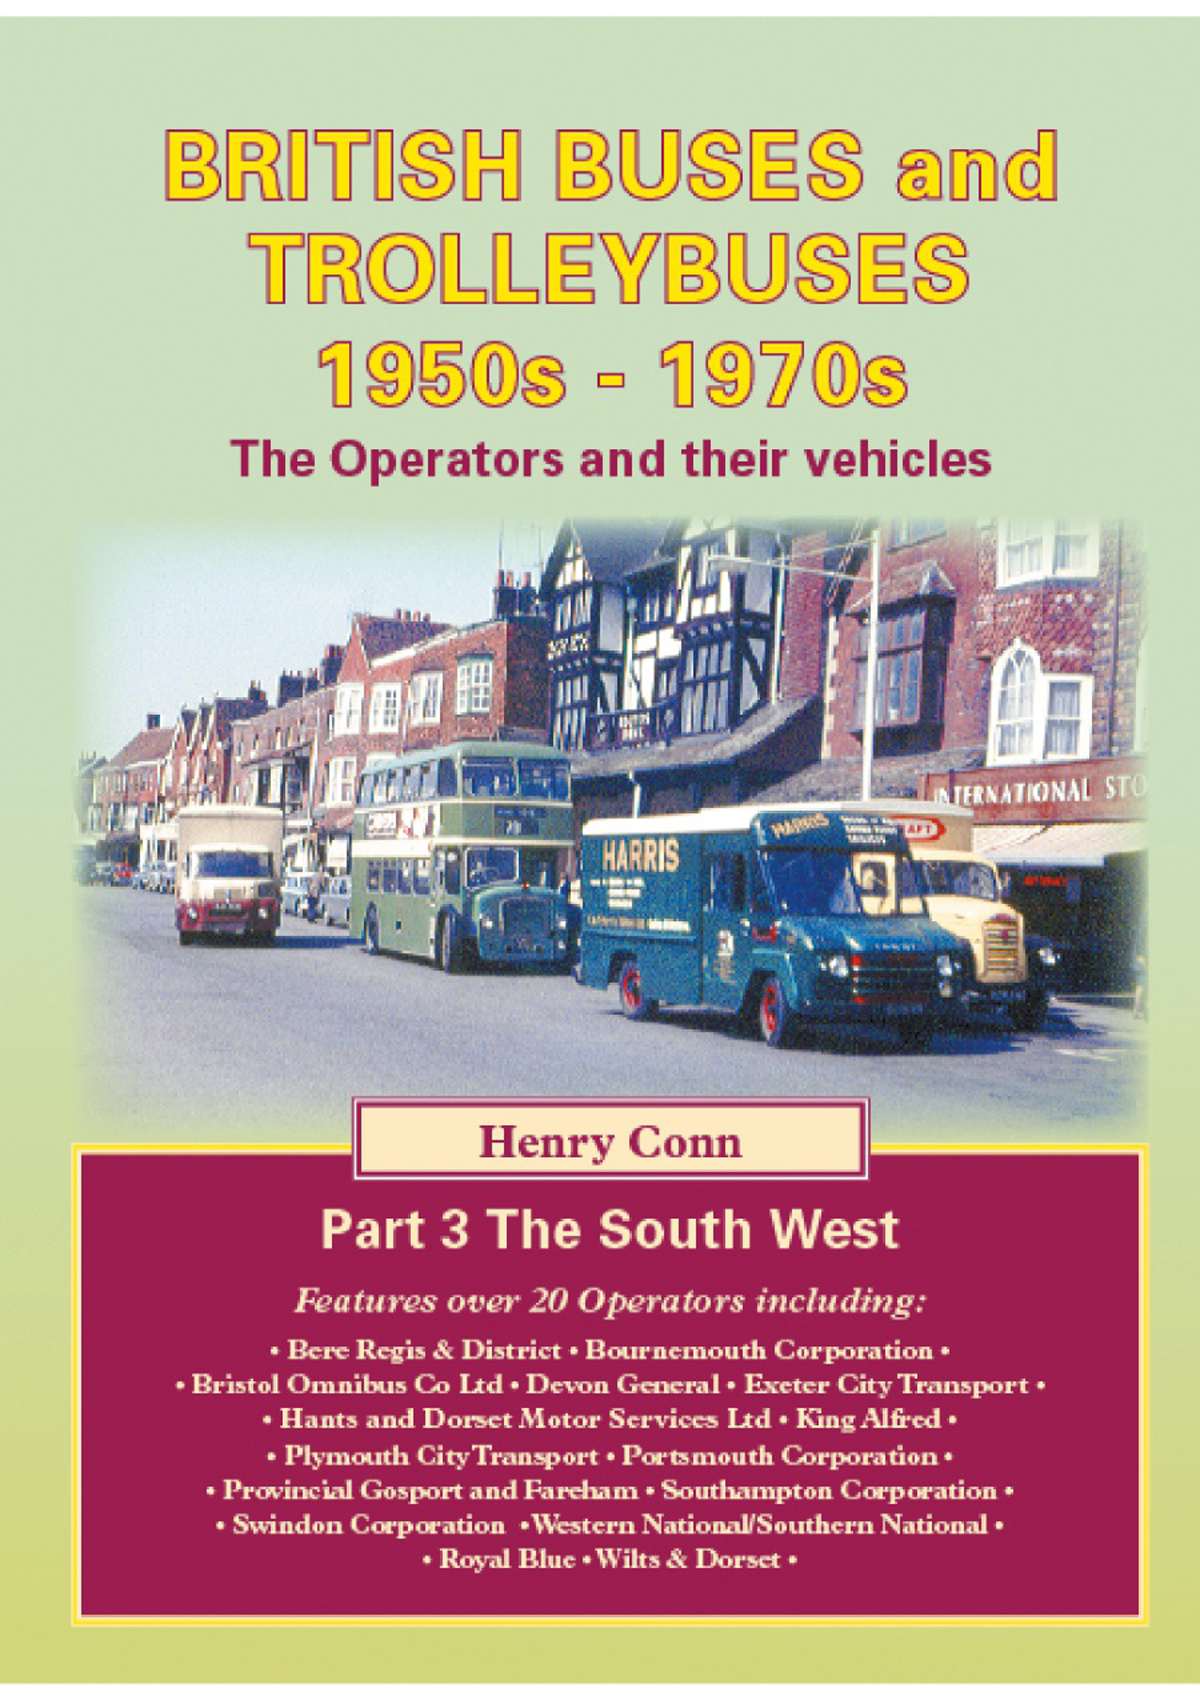 3689 - Buses & Trolleybuses Part 3: The South West